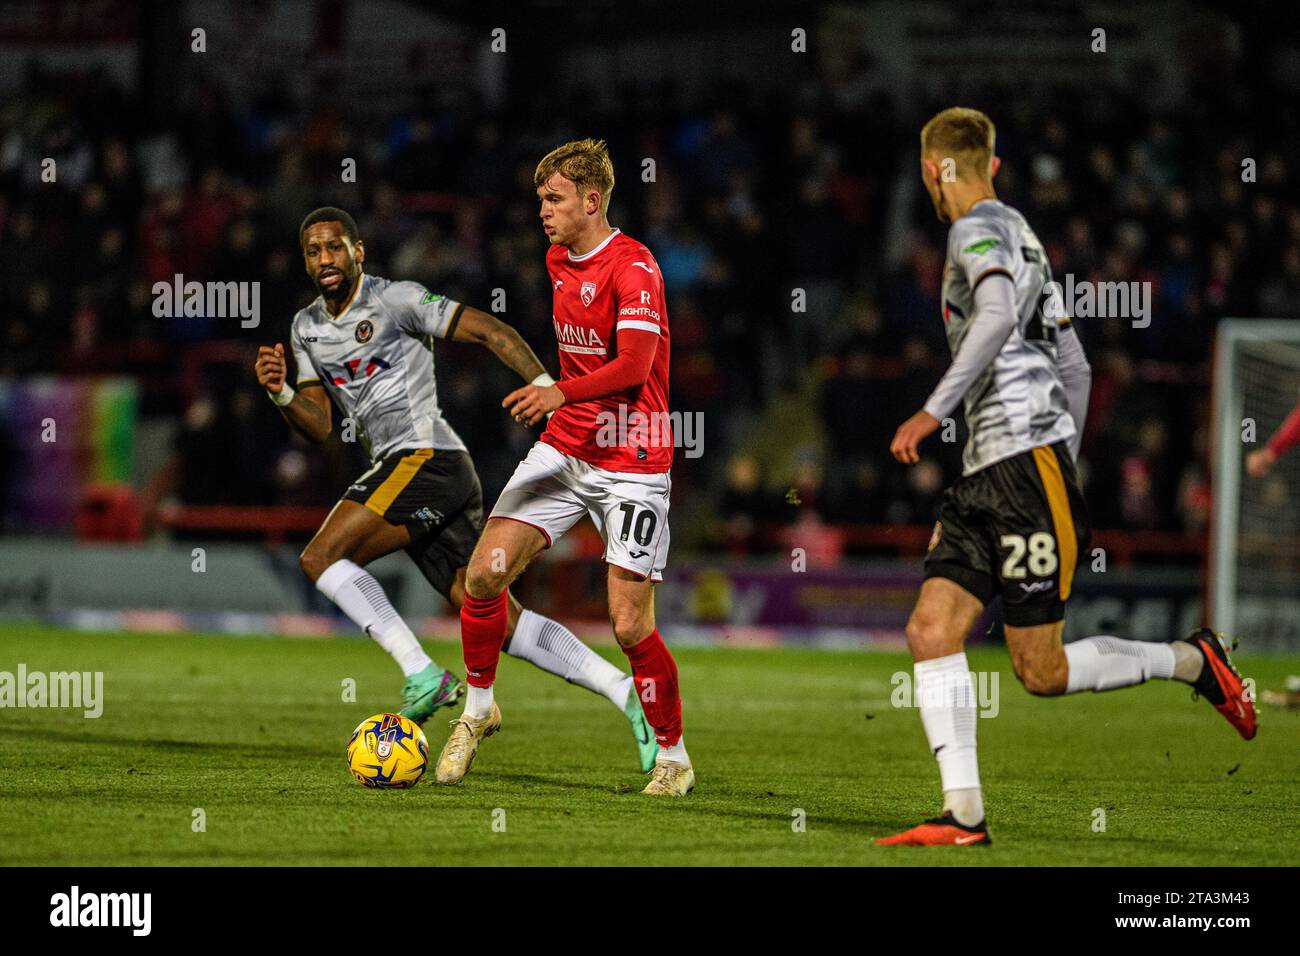 Morecambe's JJ McKiernan makes run during the Sky Bet League 2 match between Morecambe and Newport County at the Globe Arena, Morecambe on Tuesday 28th November 2023. (Photo: Ian Charles | MI News) Credit: MI News & Sport /Alamy Live News Stock Photo